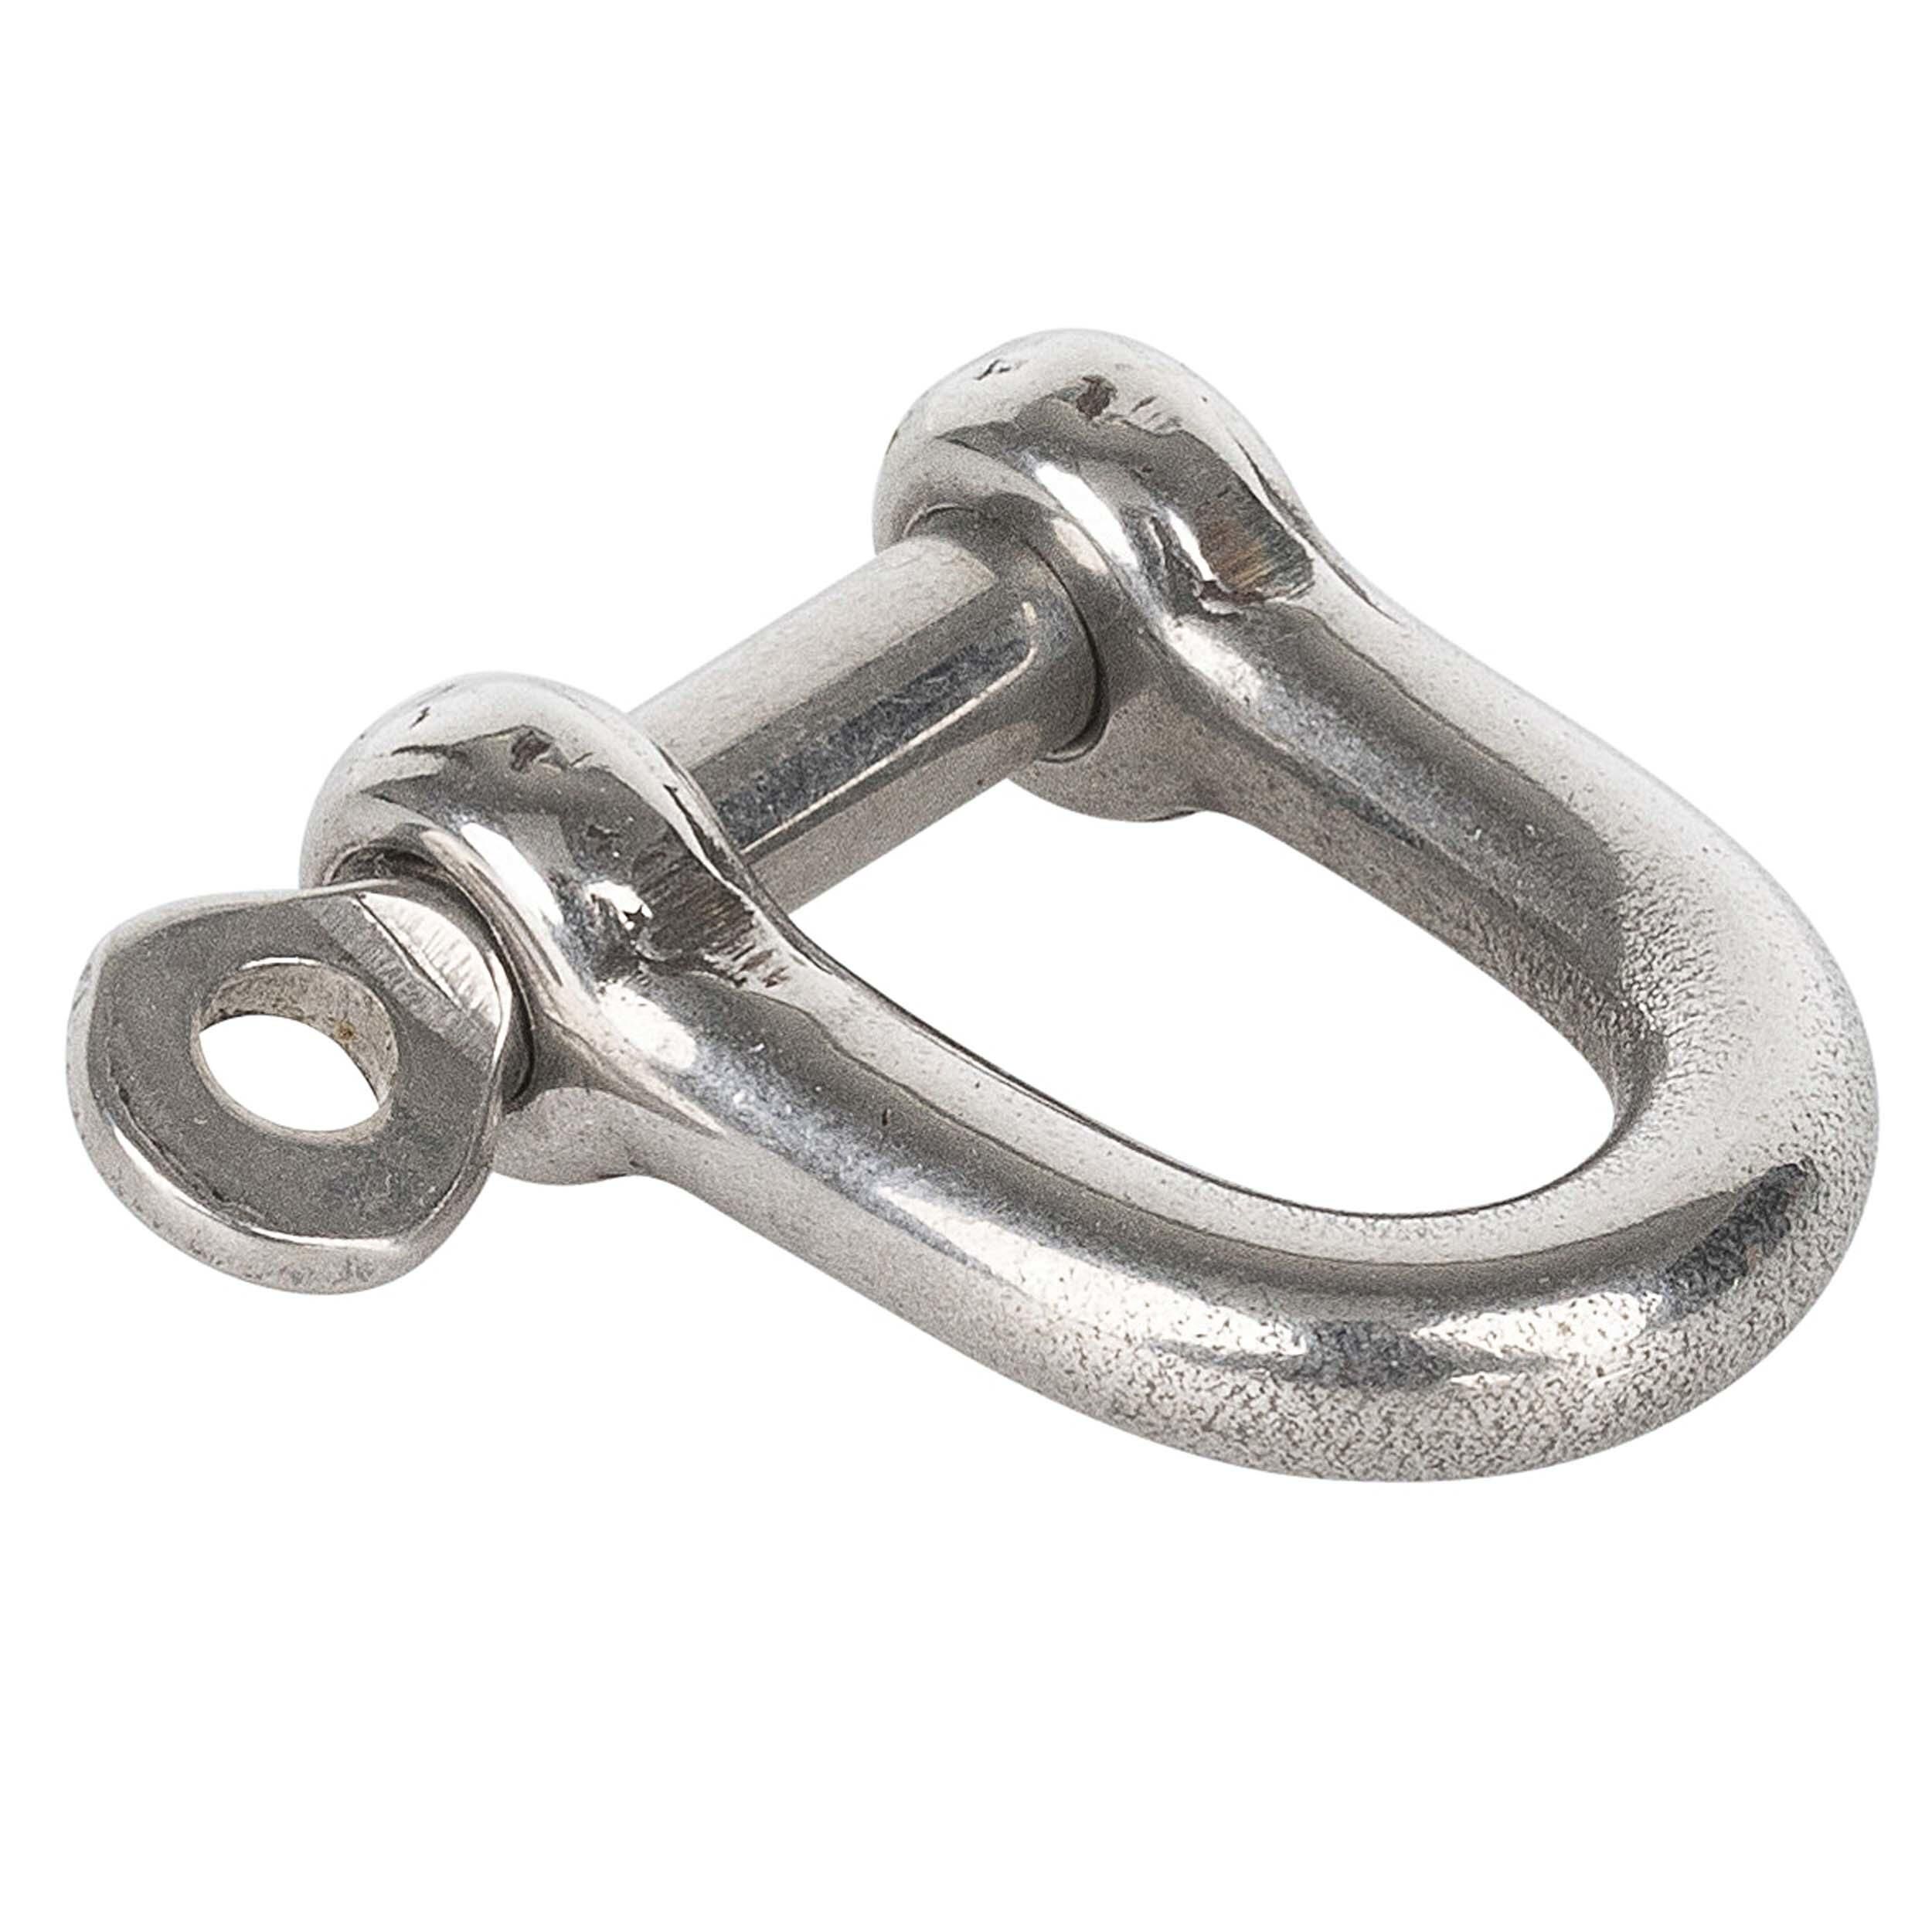 PLASTIMO 6 mm stainless steel straight captive pin sailing shackle